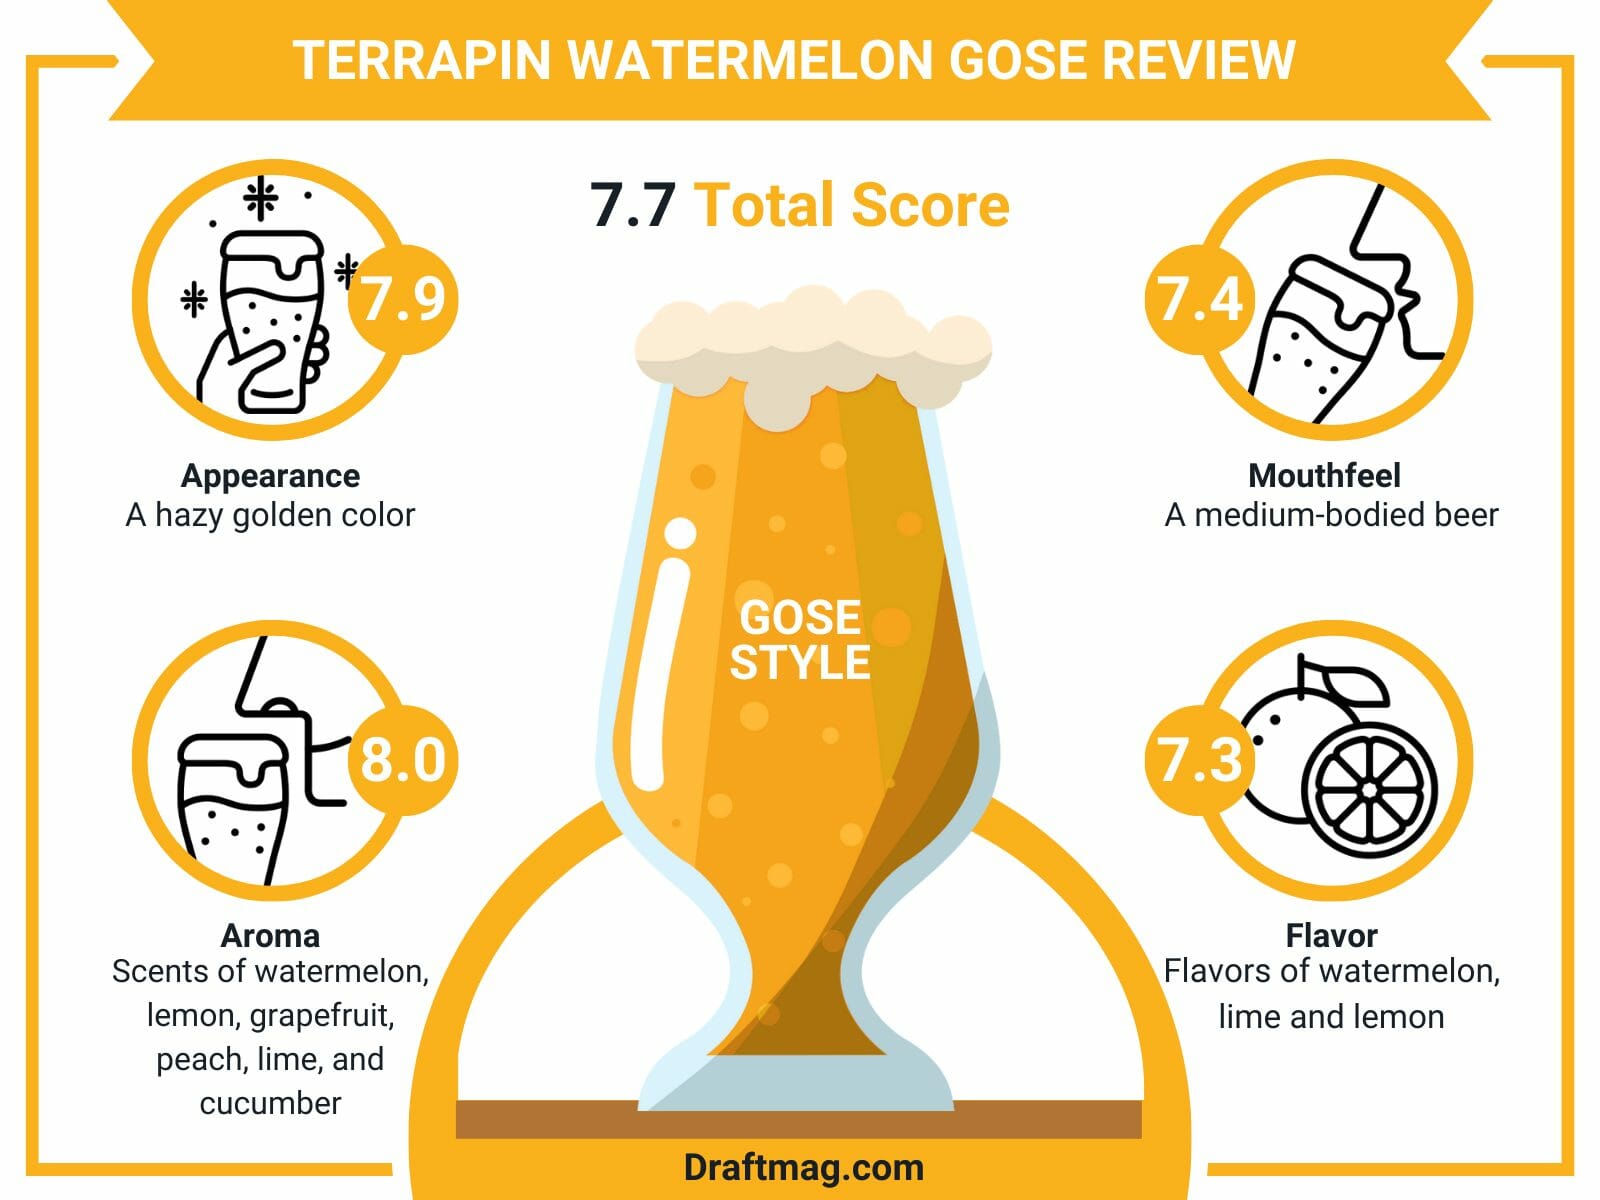 Terrapin Watermelon Gose Review Infographic